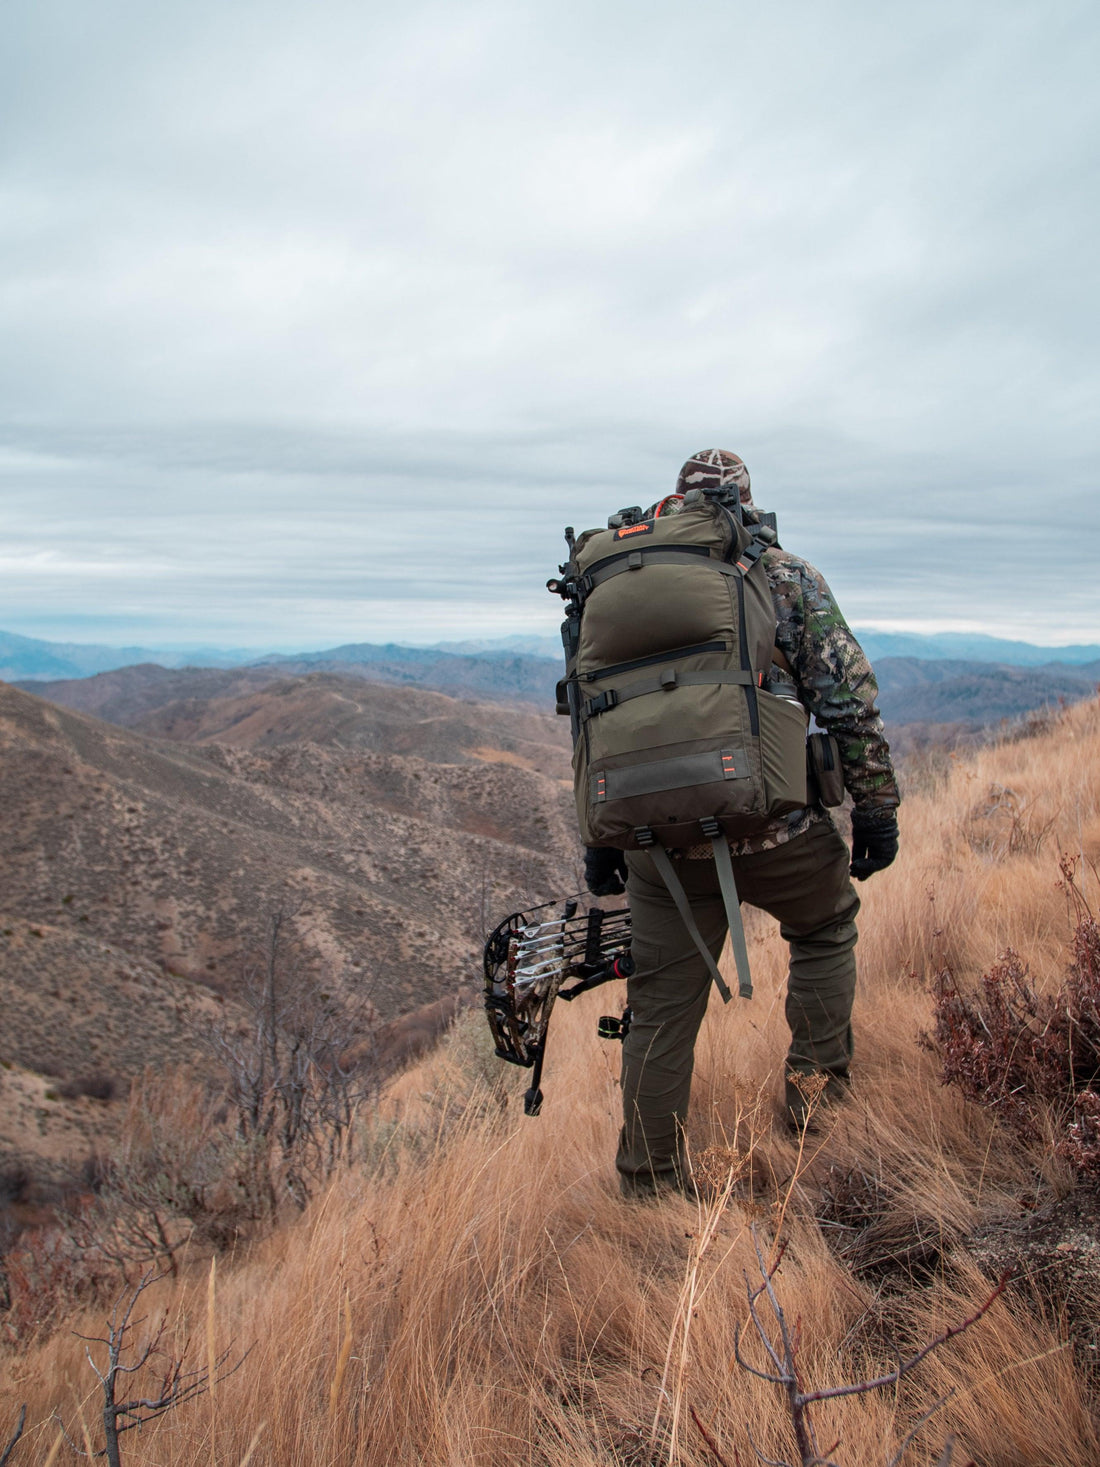 Solo Hunting: One Perspective - Initial Ascent